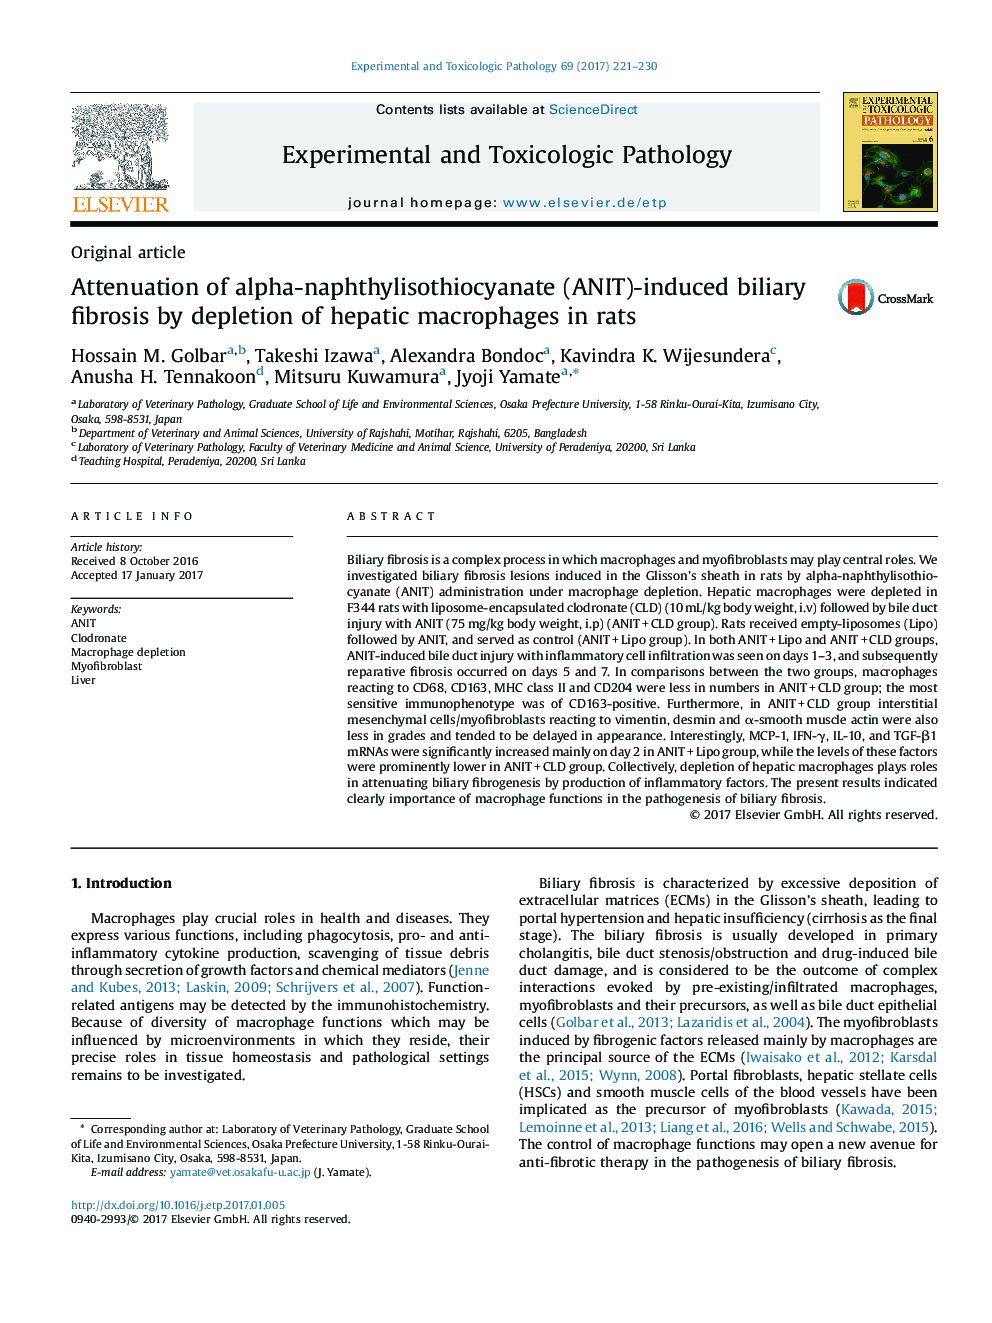 Attenuation of alpha-naphthylisothiocyanate (ANIT)-induced biliary fibrosis by depletion of hepatic macrophages in rats